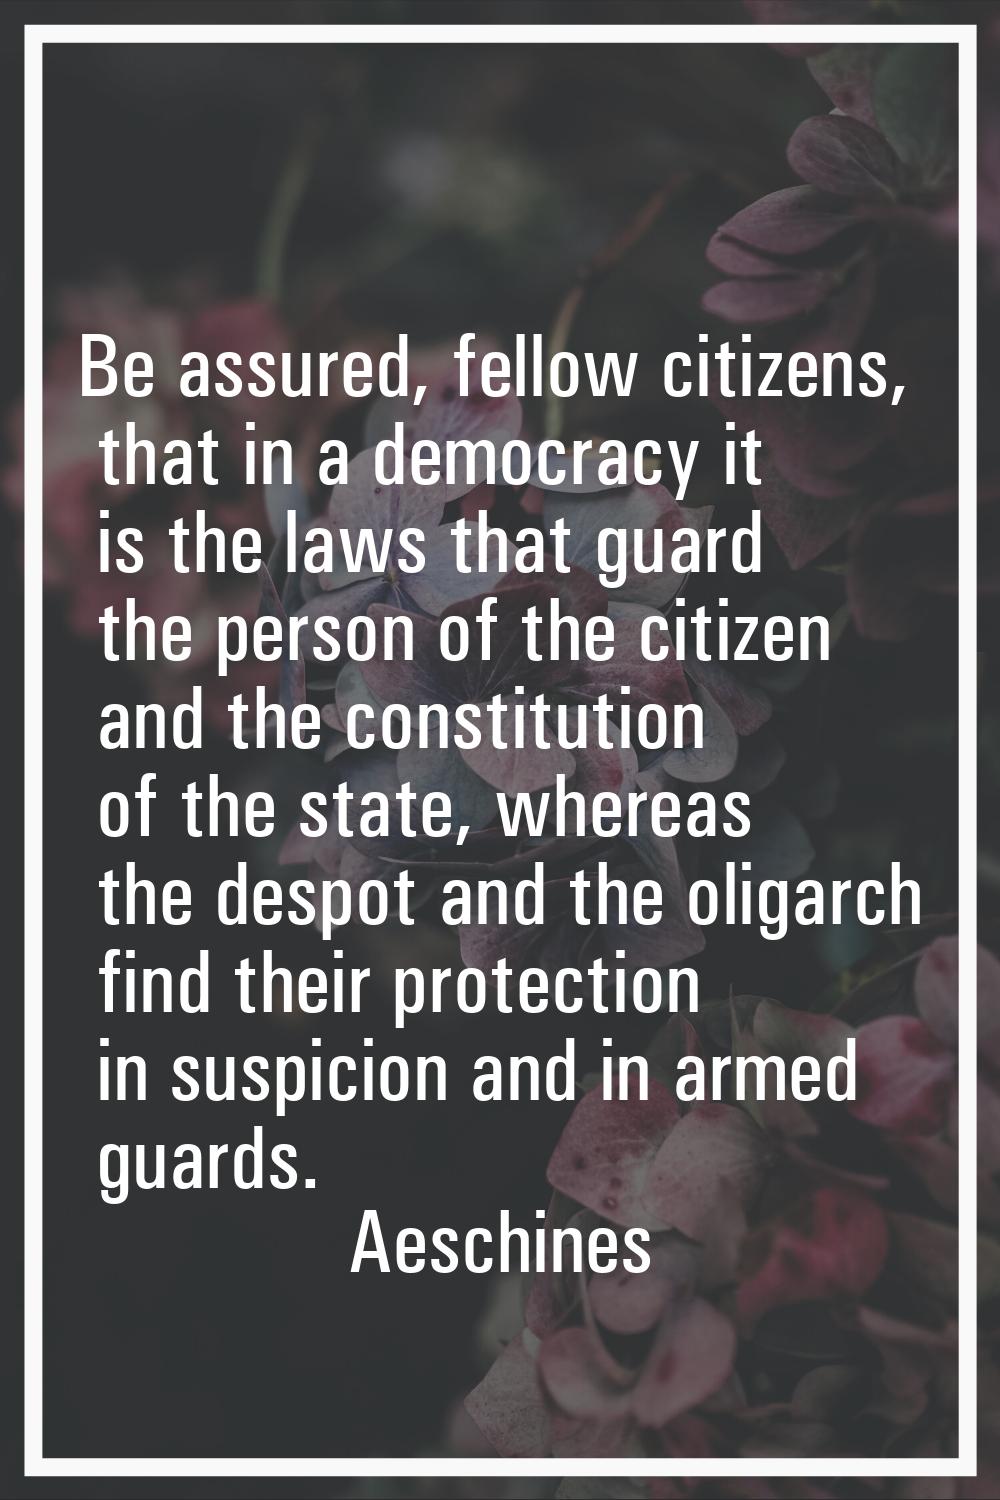 Be assured, fellow citizens, that in a democracy it is the laws that guard the person of the citize